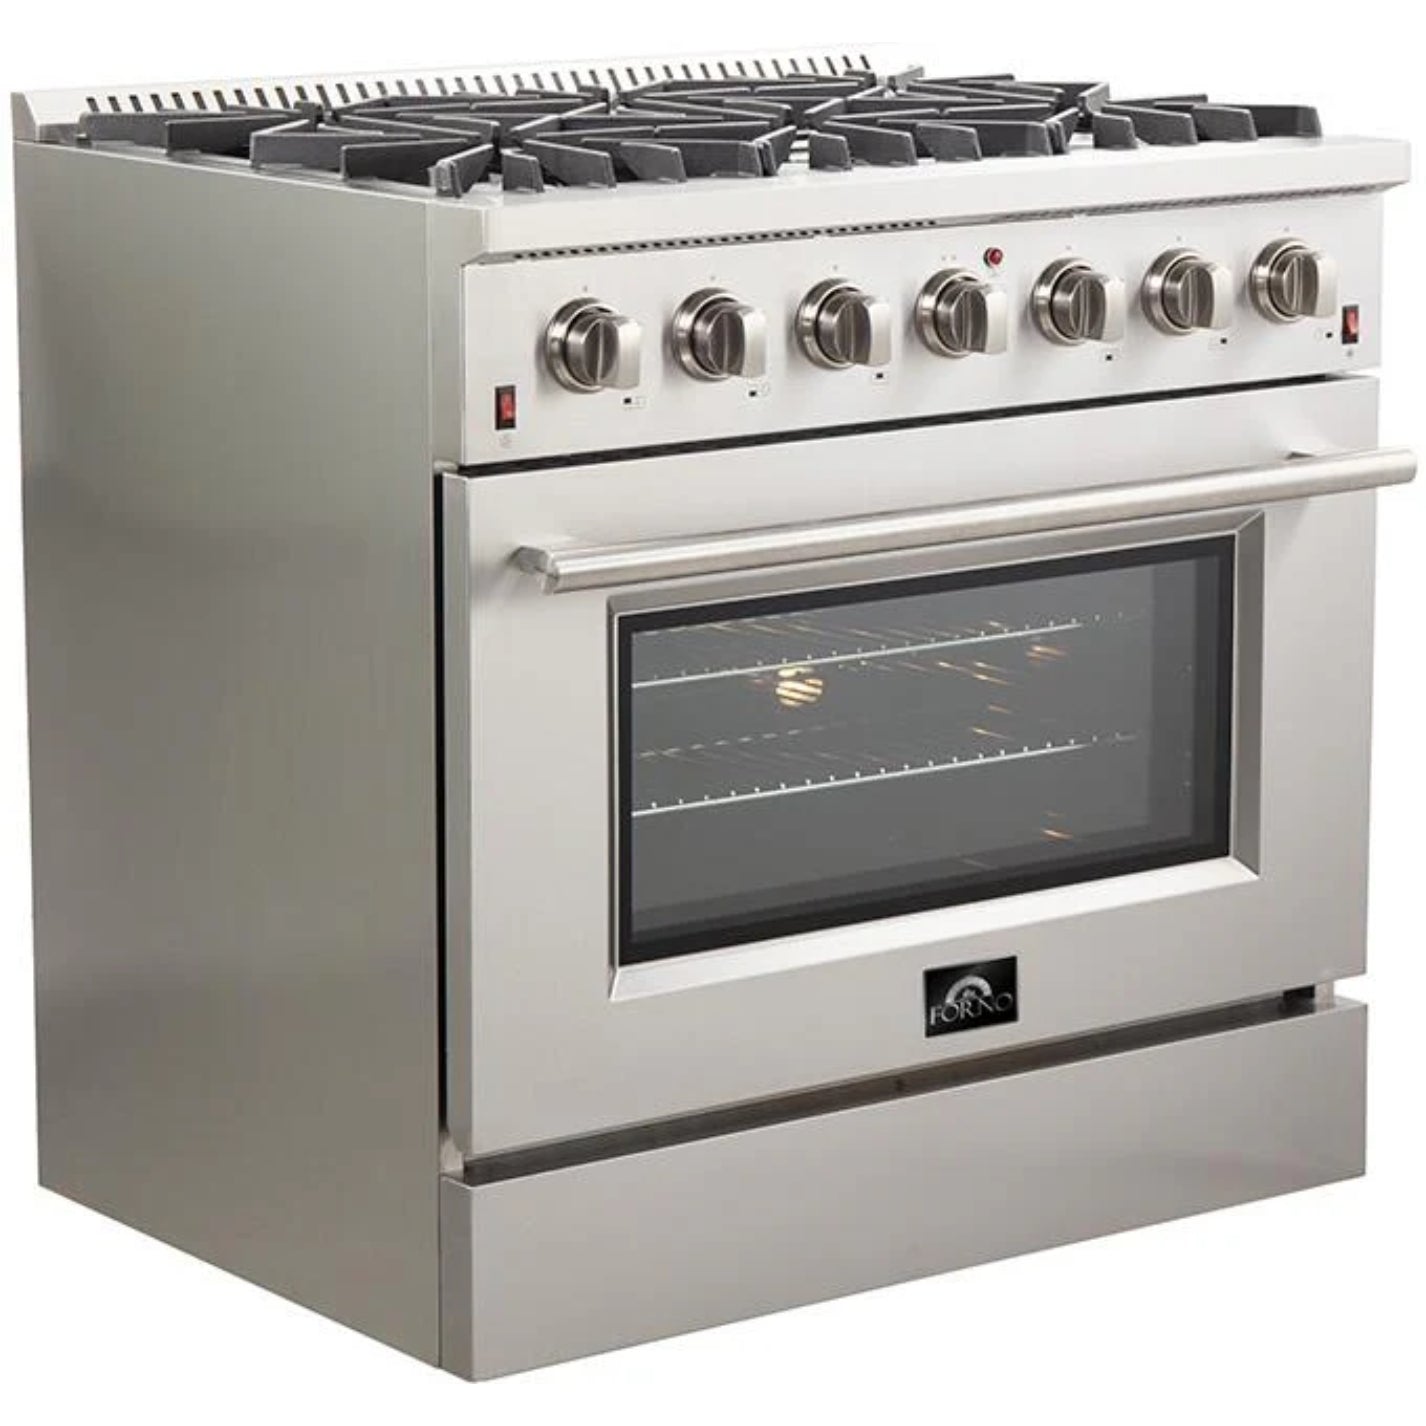 Forno Galiano 36-inch Freestanding Gas Range Stainless Steel, 6 Burners, 5.36 cu.ft. Convection Oven, FFSGS6244-36